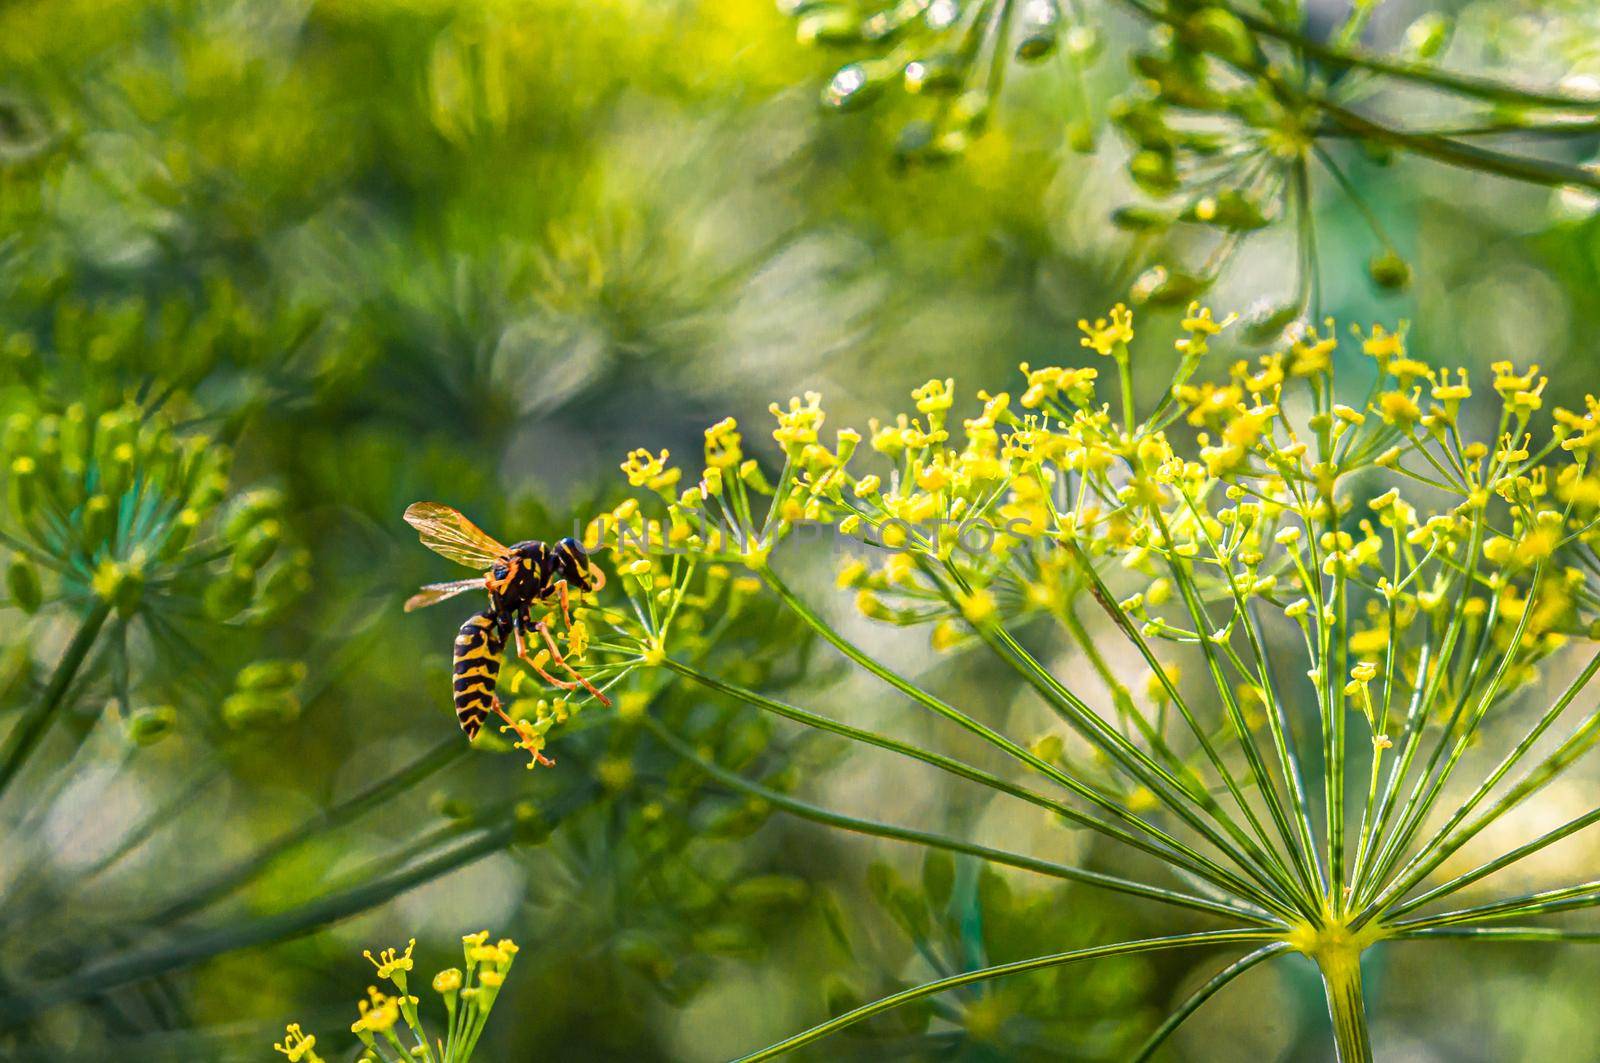 A heavy wasp, with difficulty holding on to the staggering dill flowers, drinks nectar from them.